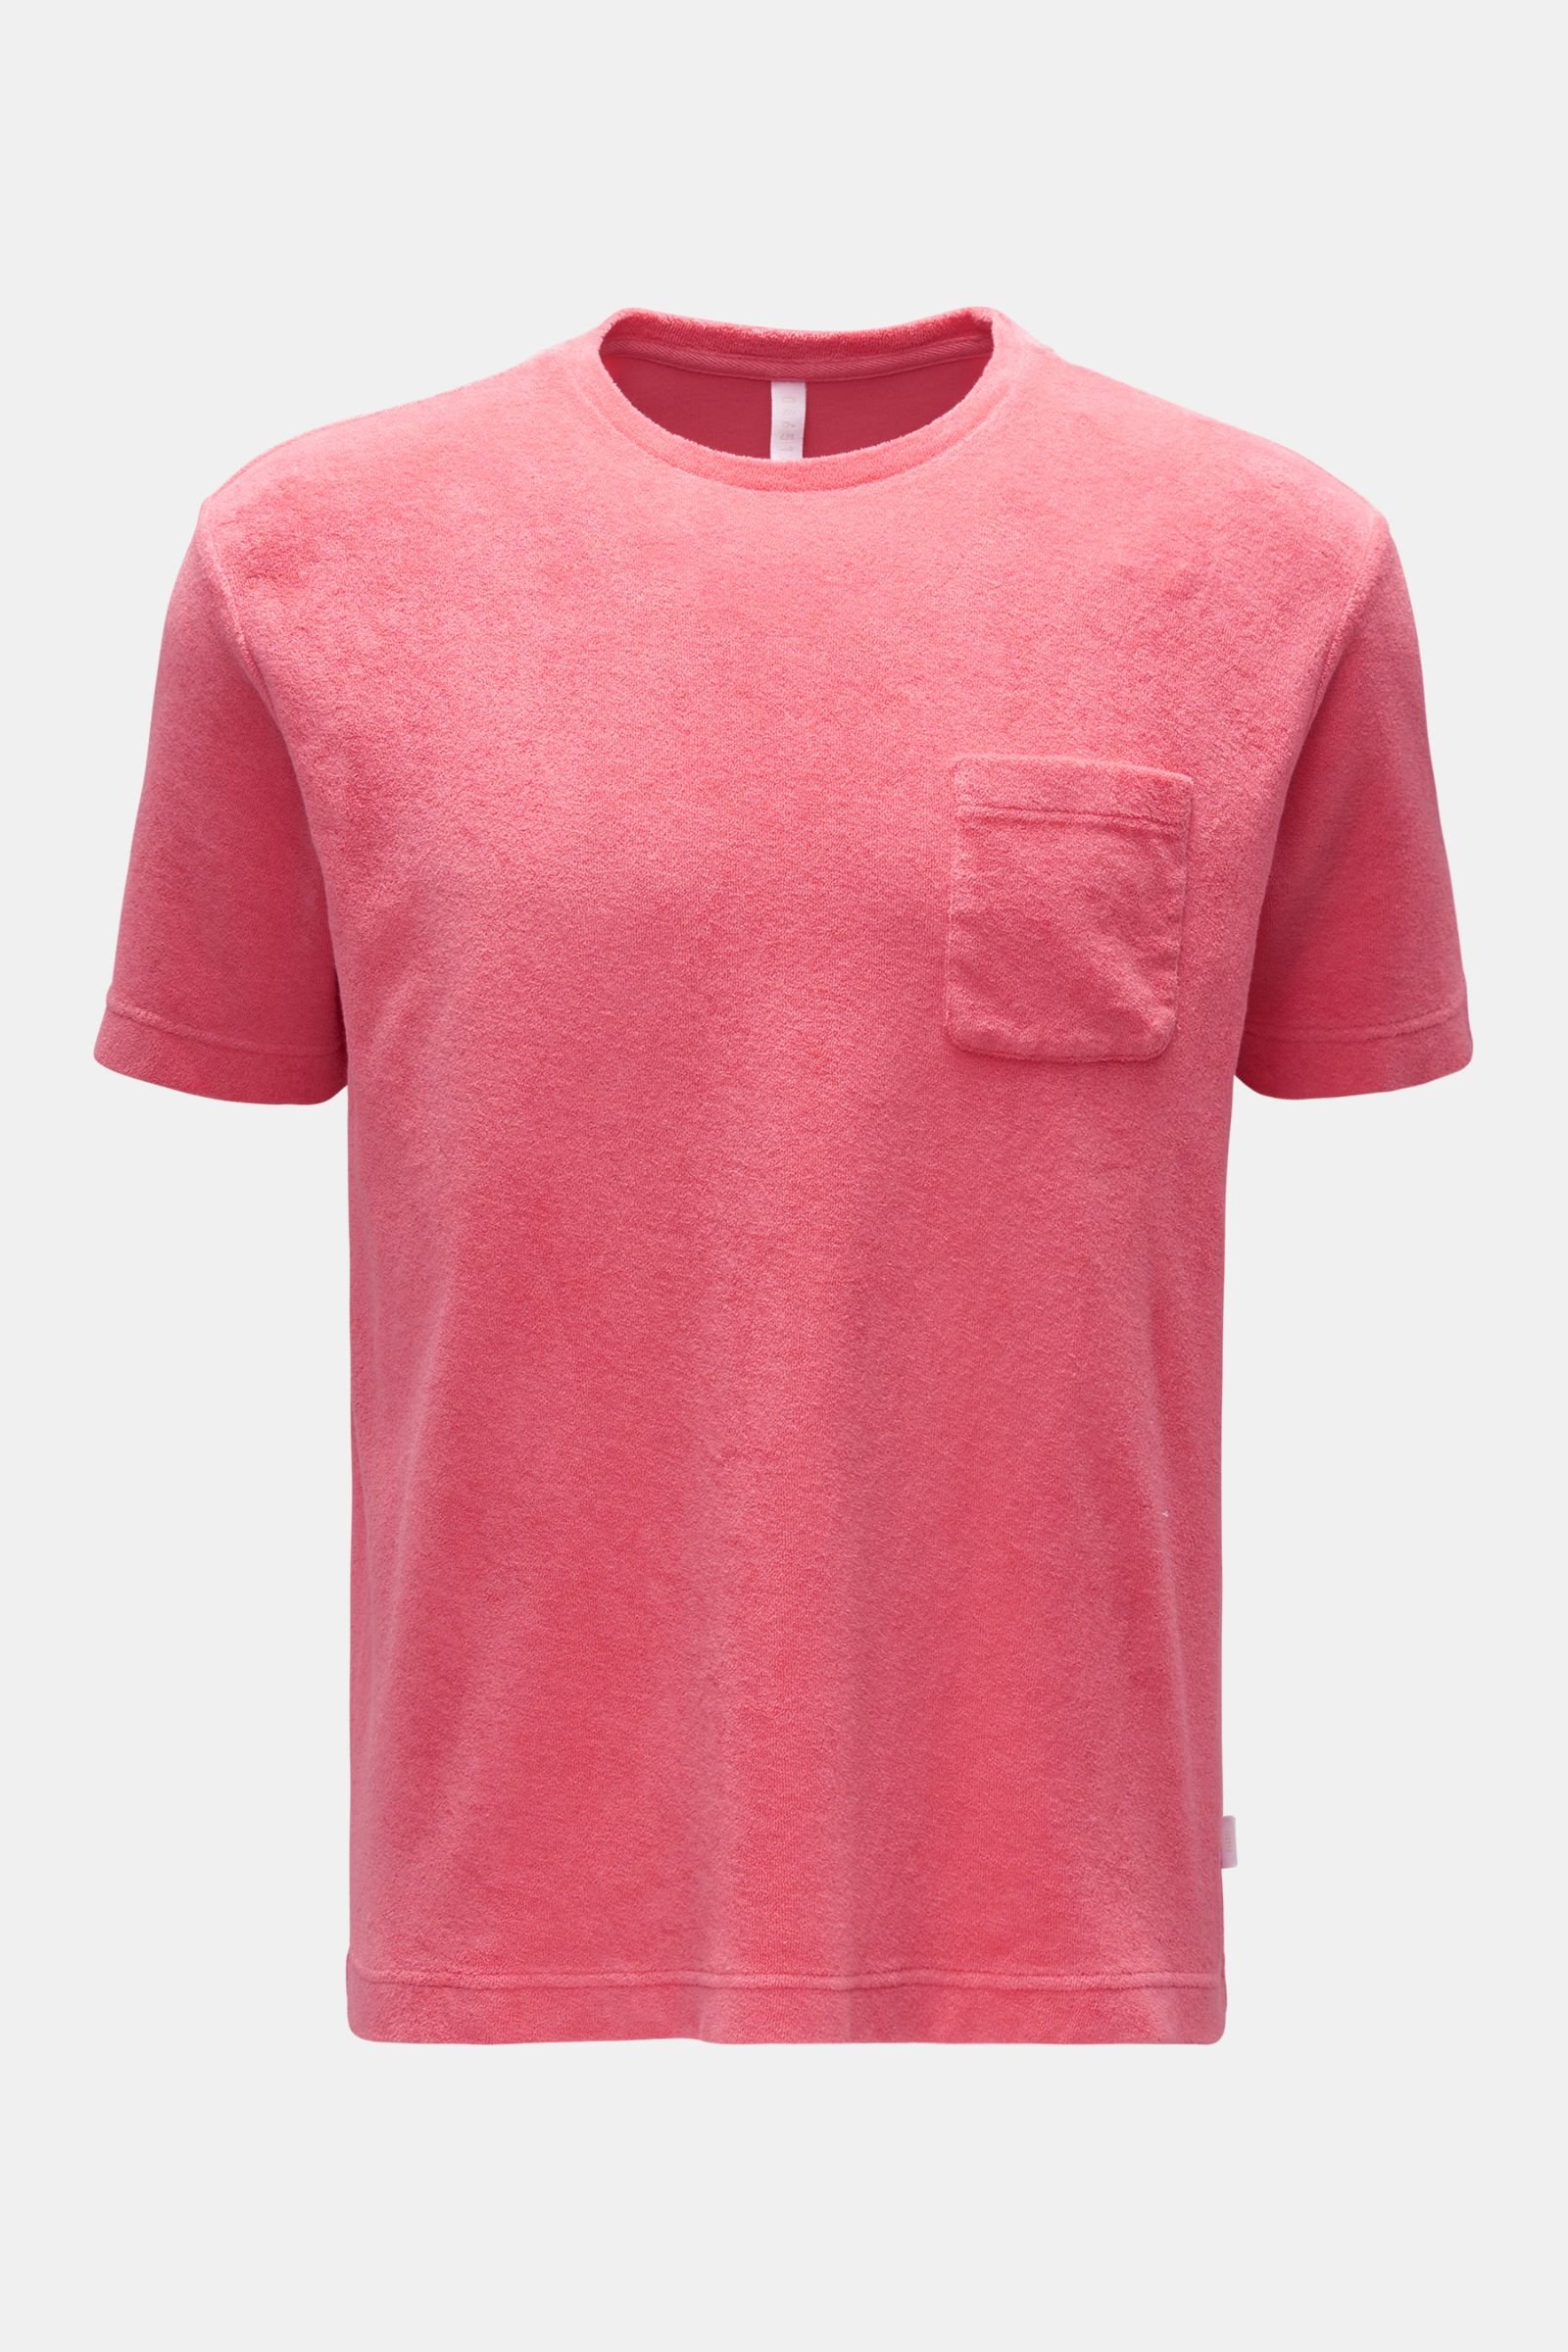 Terry crew neck T-shirt 'Terry Tee' coral